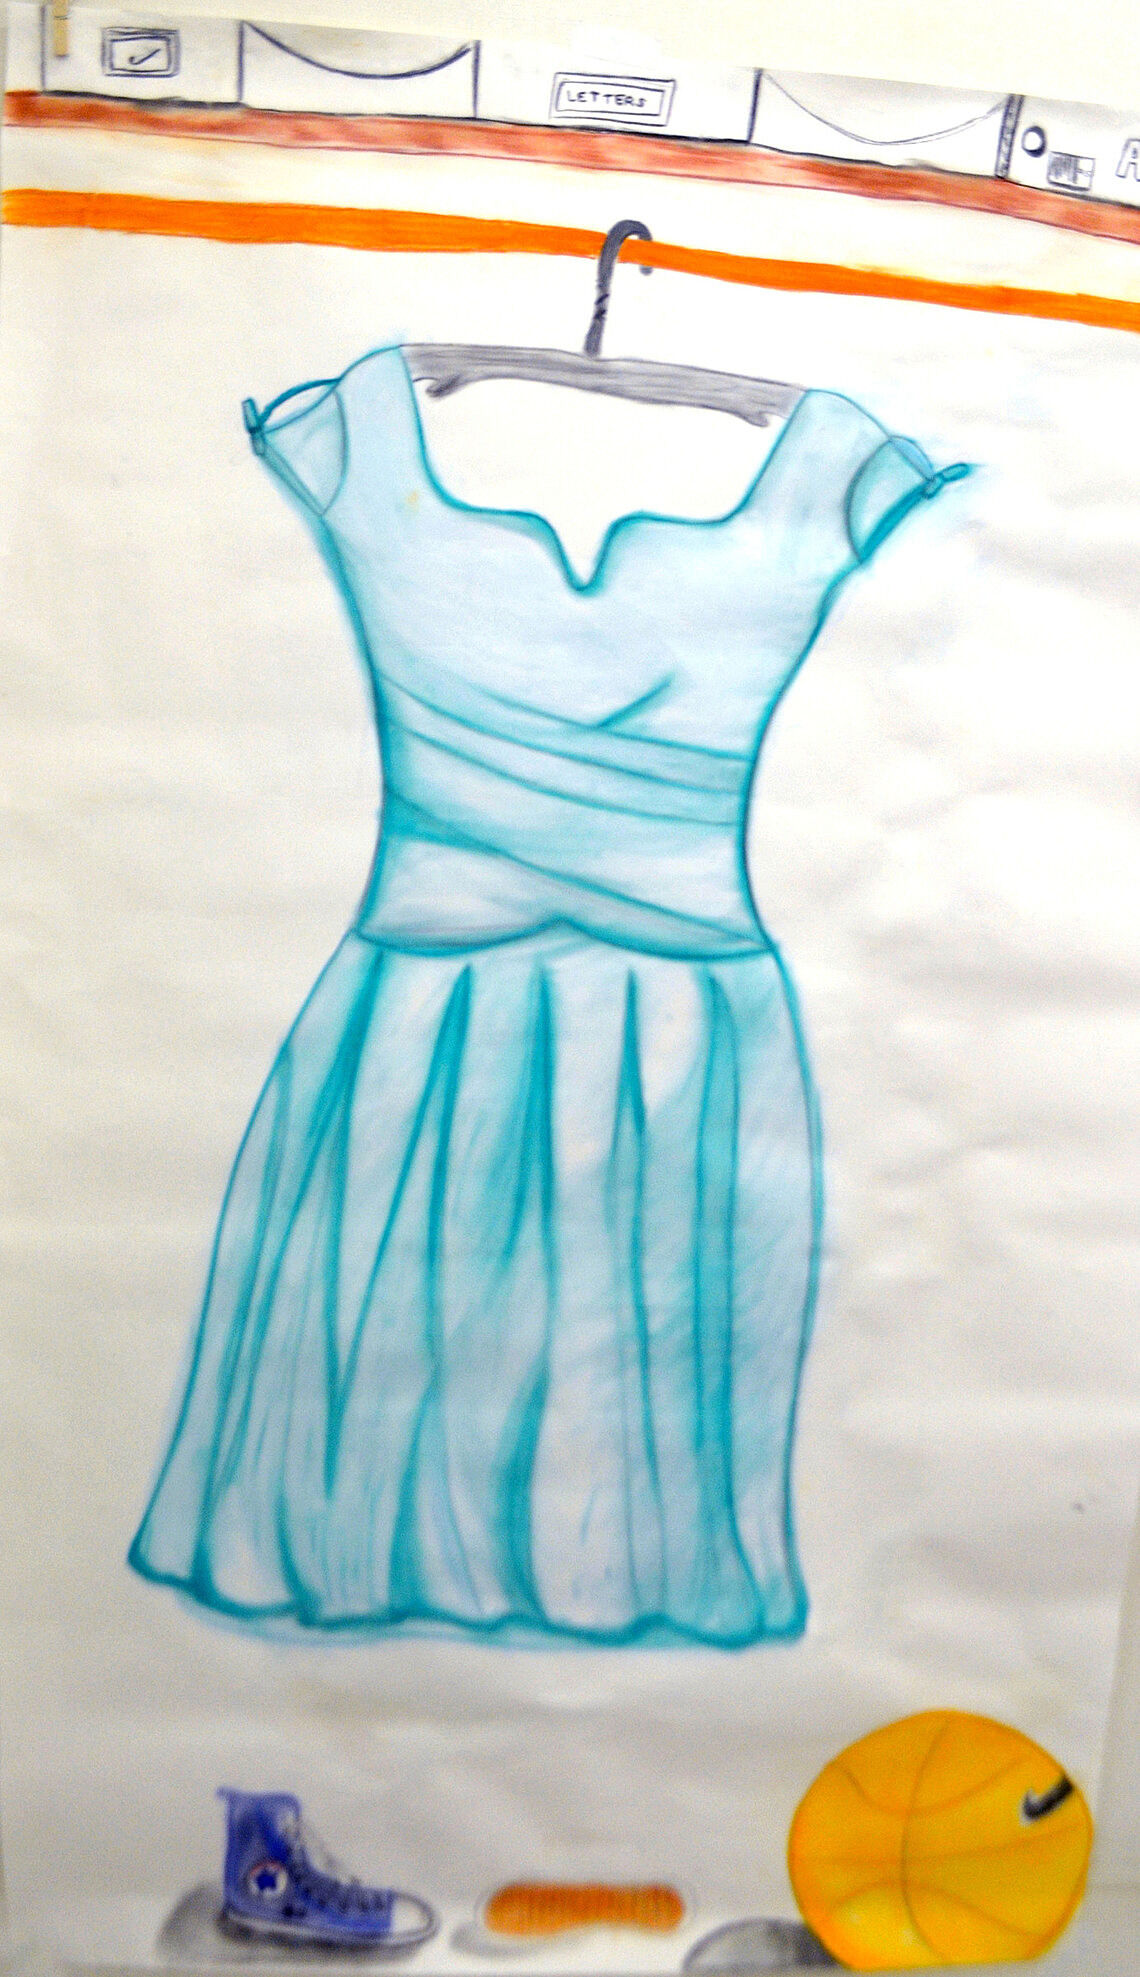 A drawing of a blue dress hanging on rack.